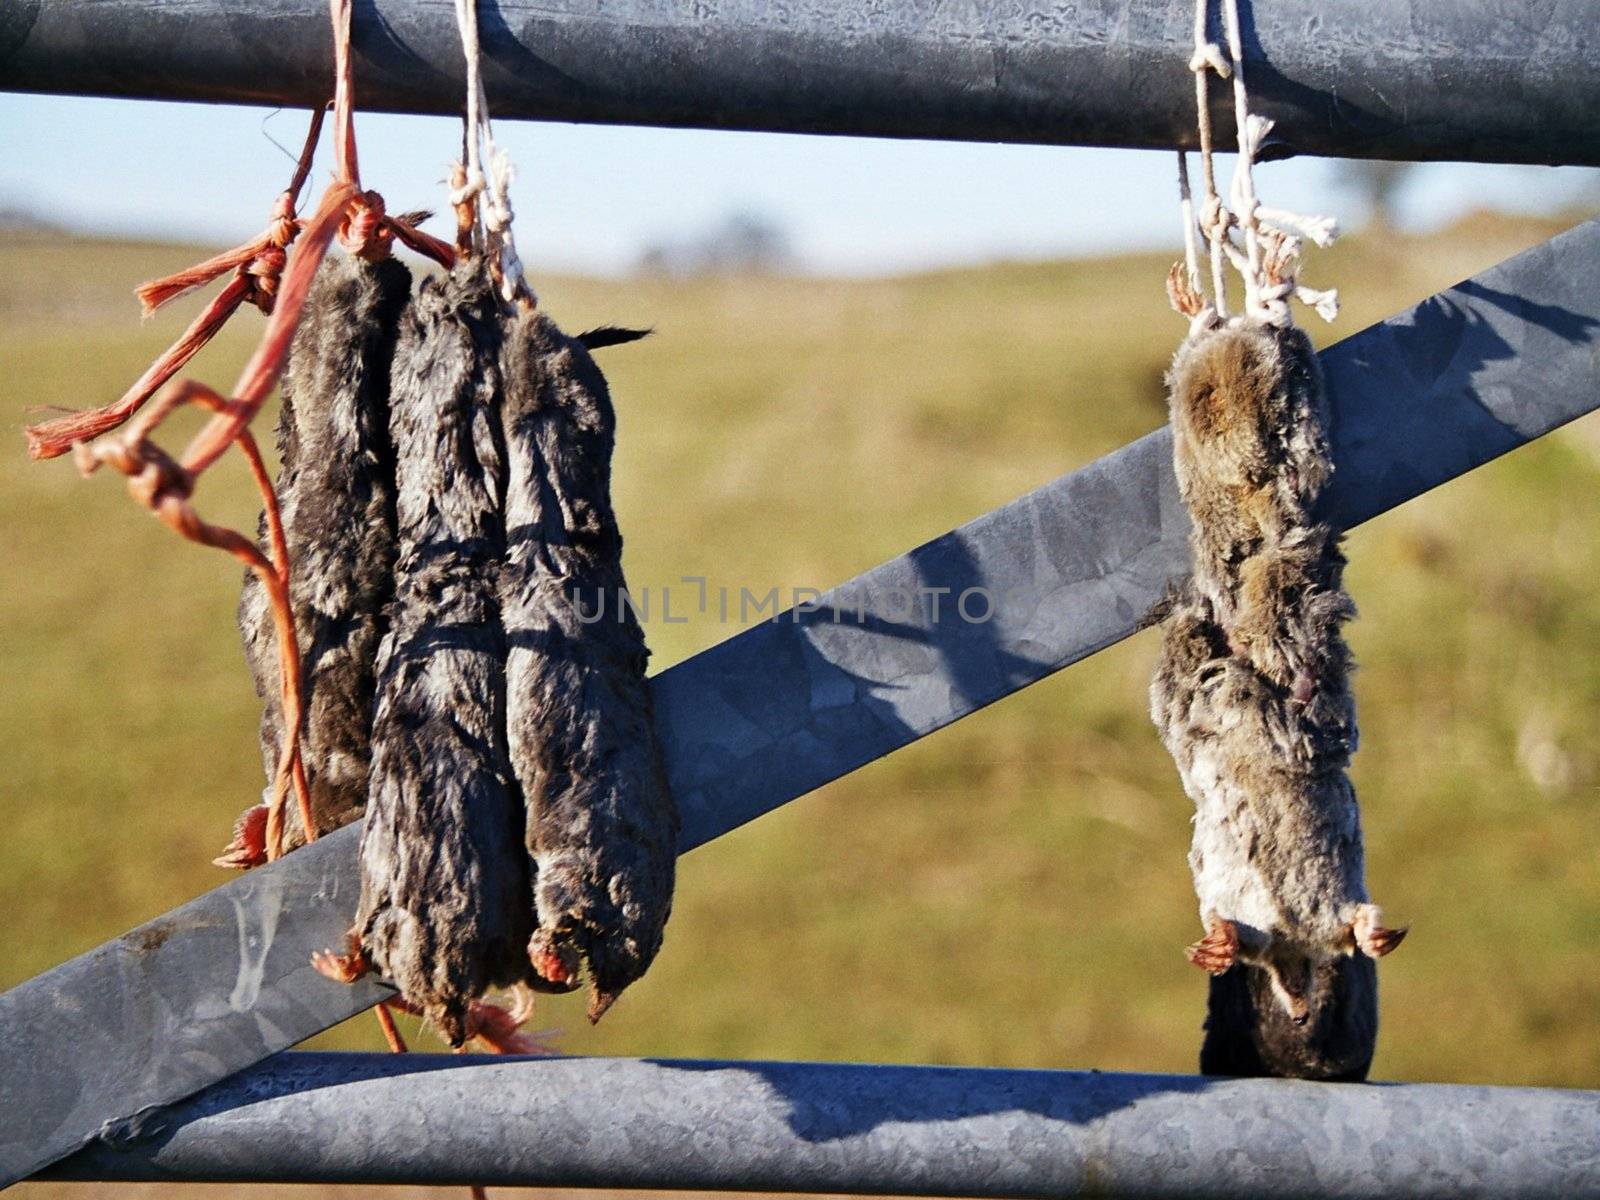 dead moles on a gate, dales, superstition